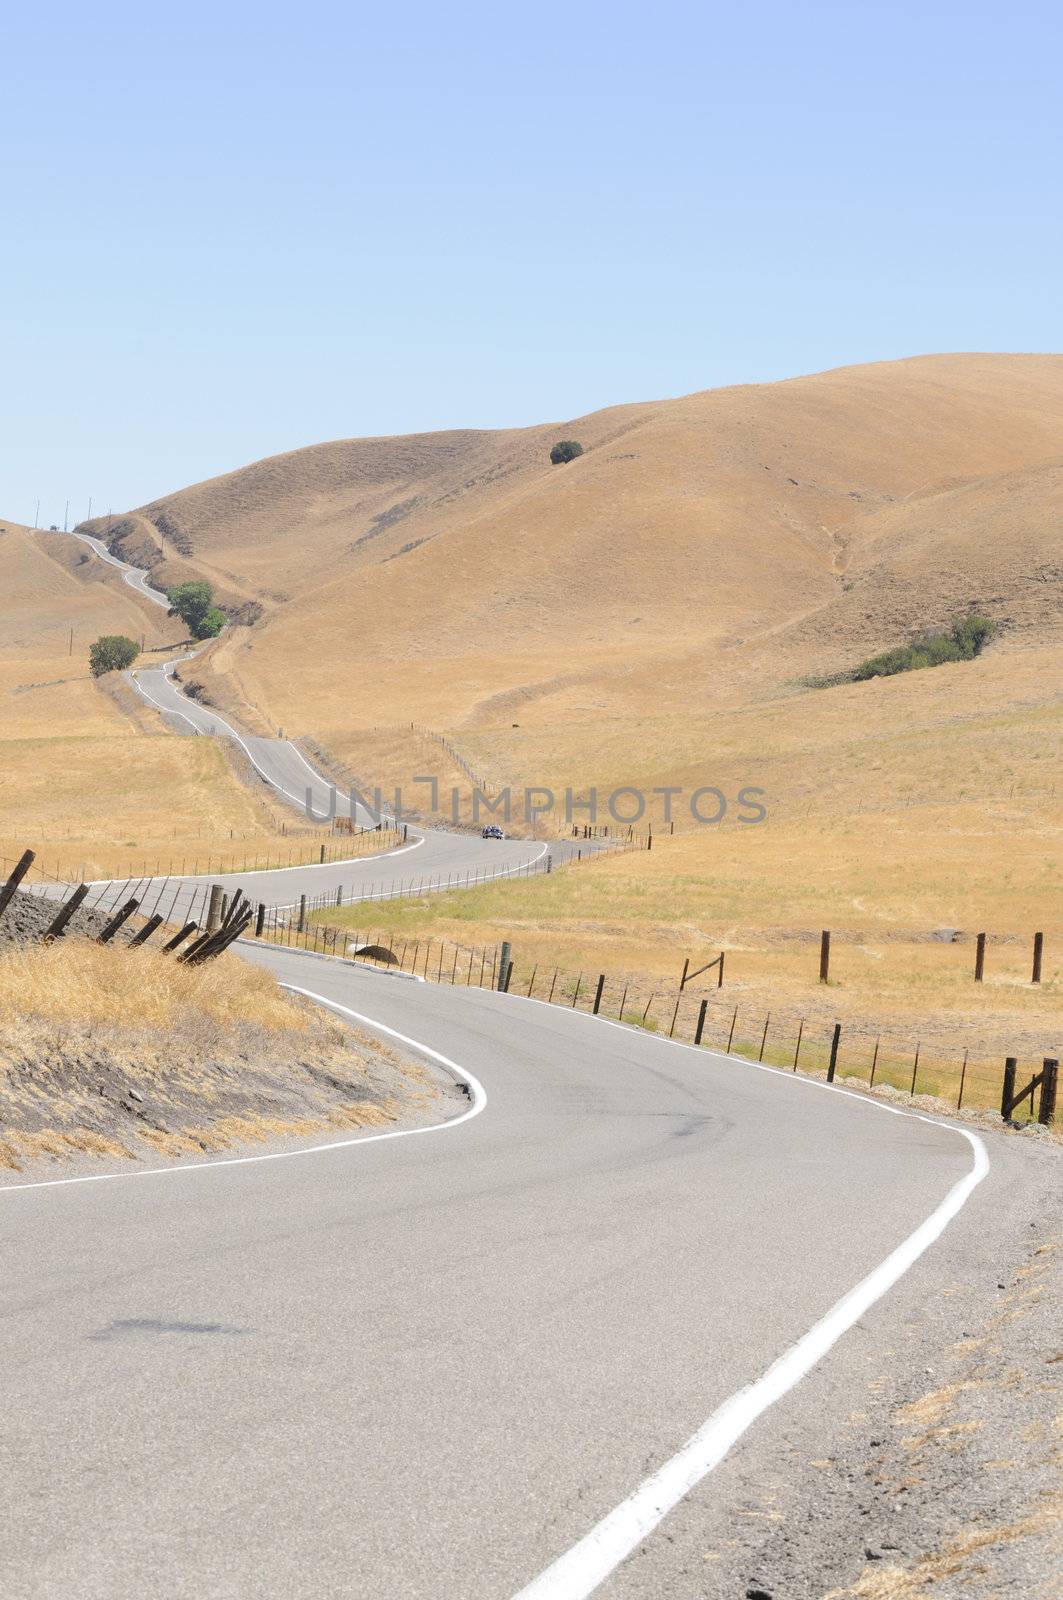 hot rod sports car negotiating a country road in California